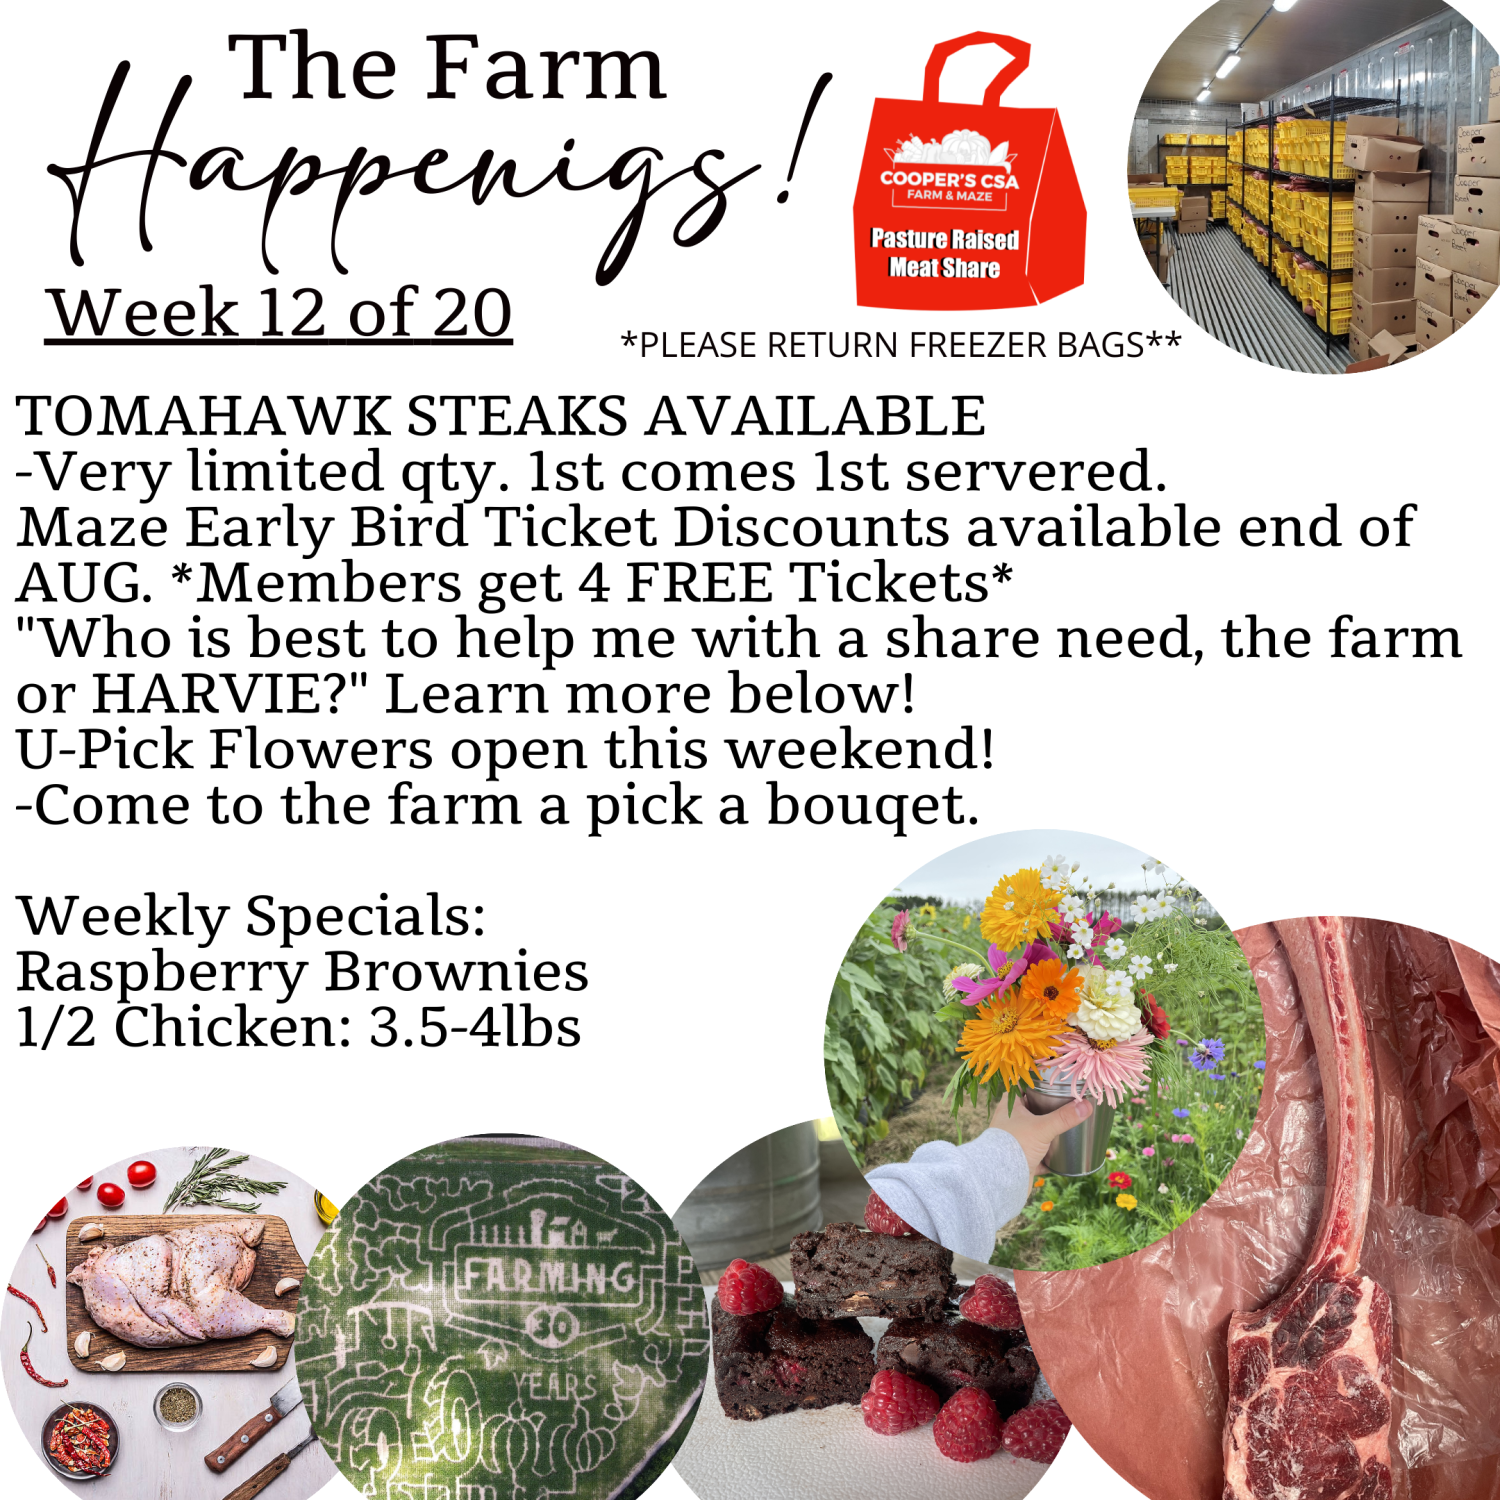 "Pasture Meat Shares"-Coopers CSA Farm Farm Happenings Week 12